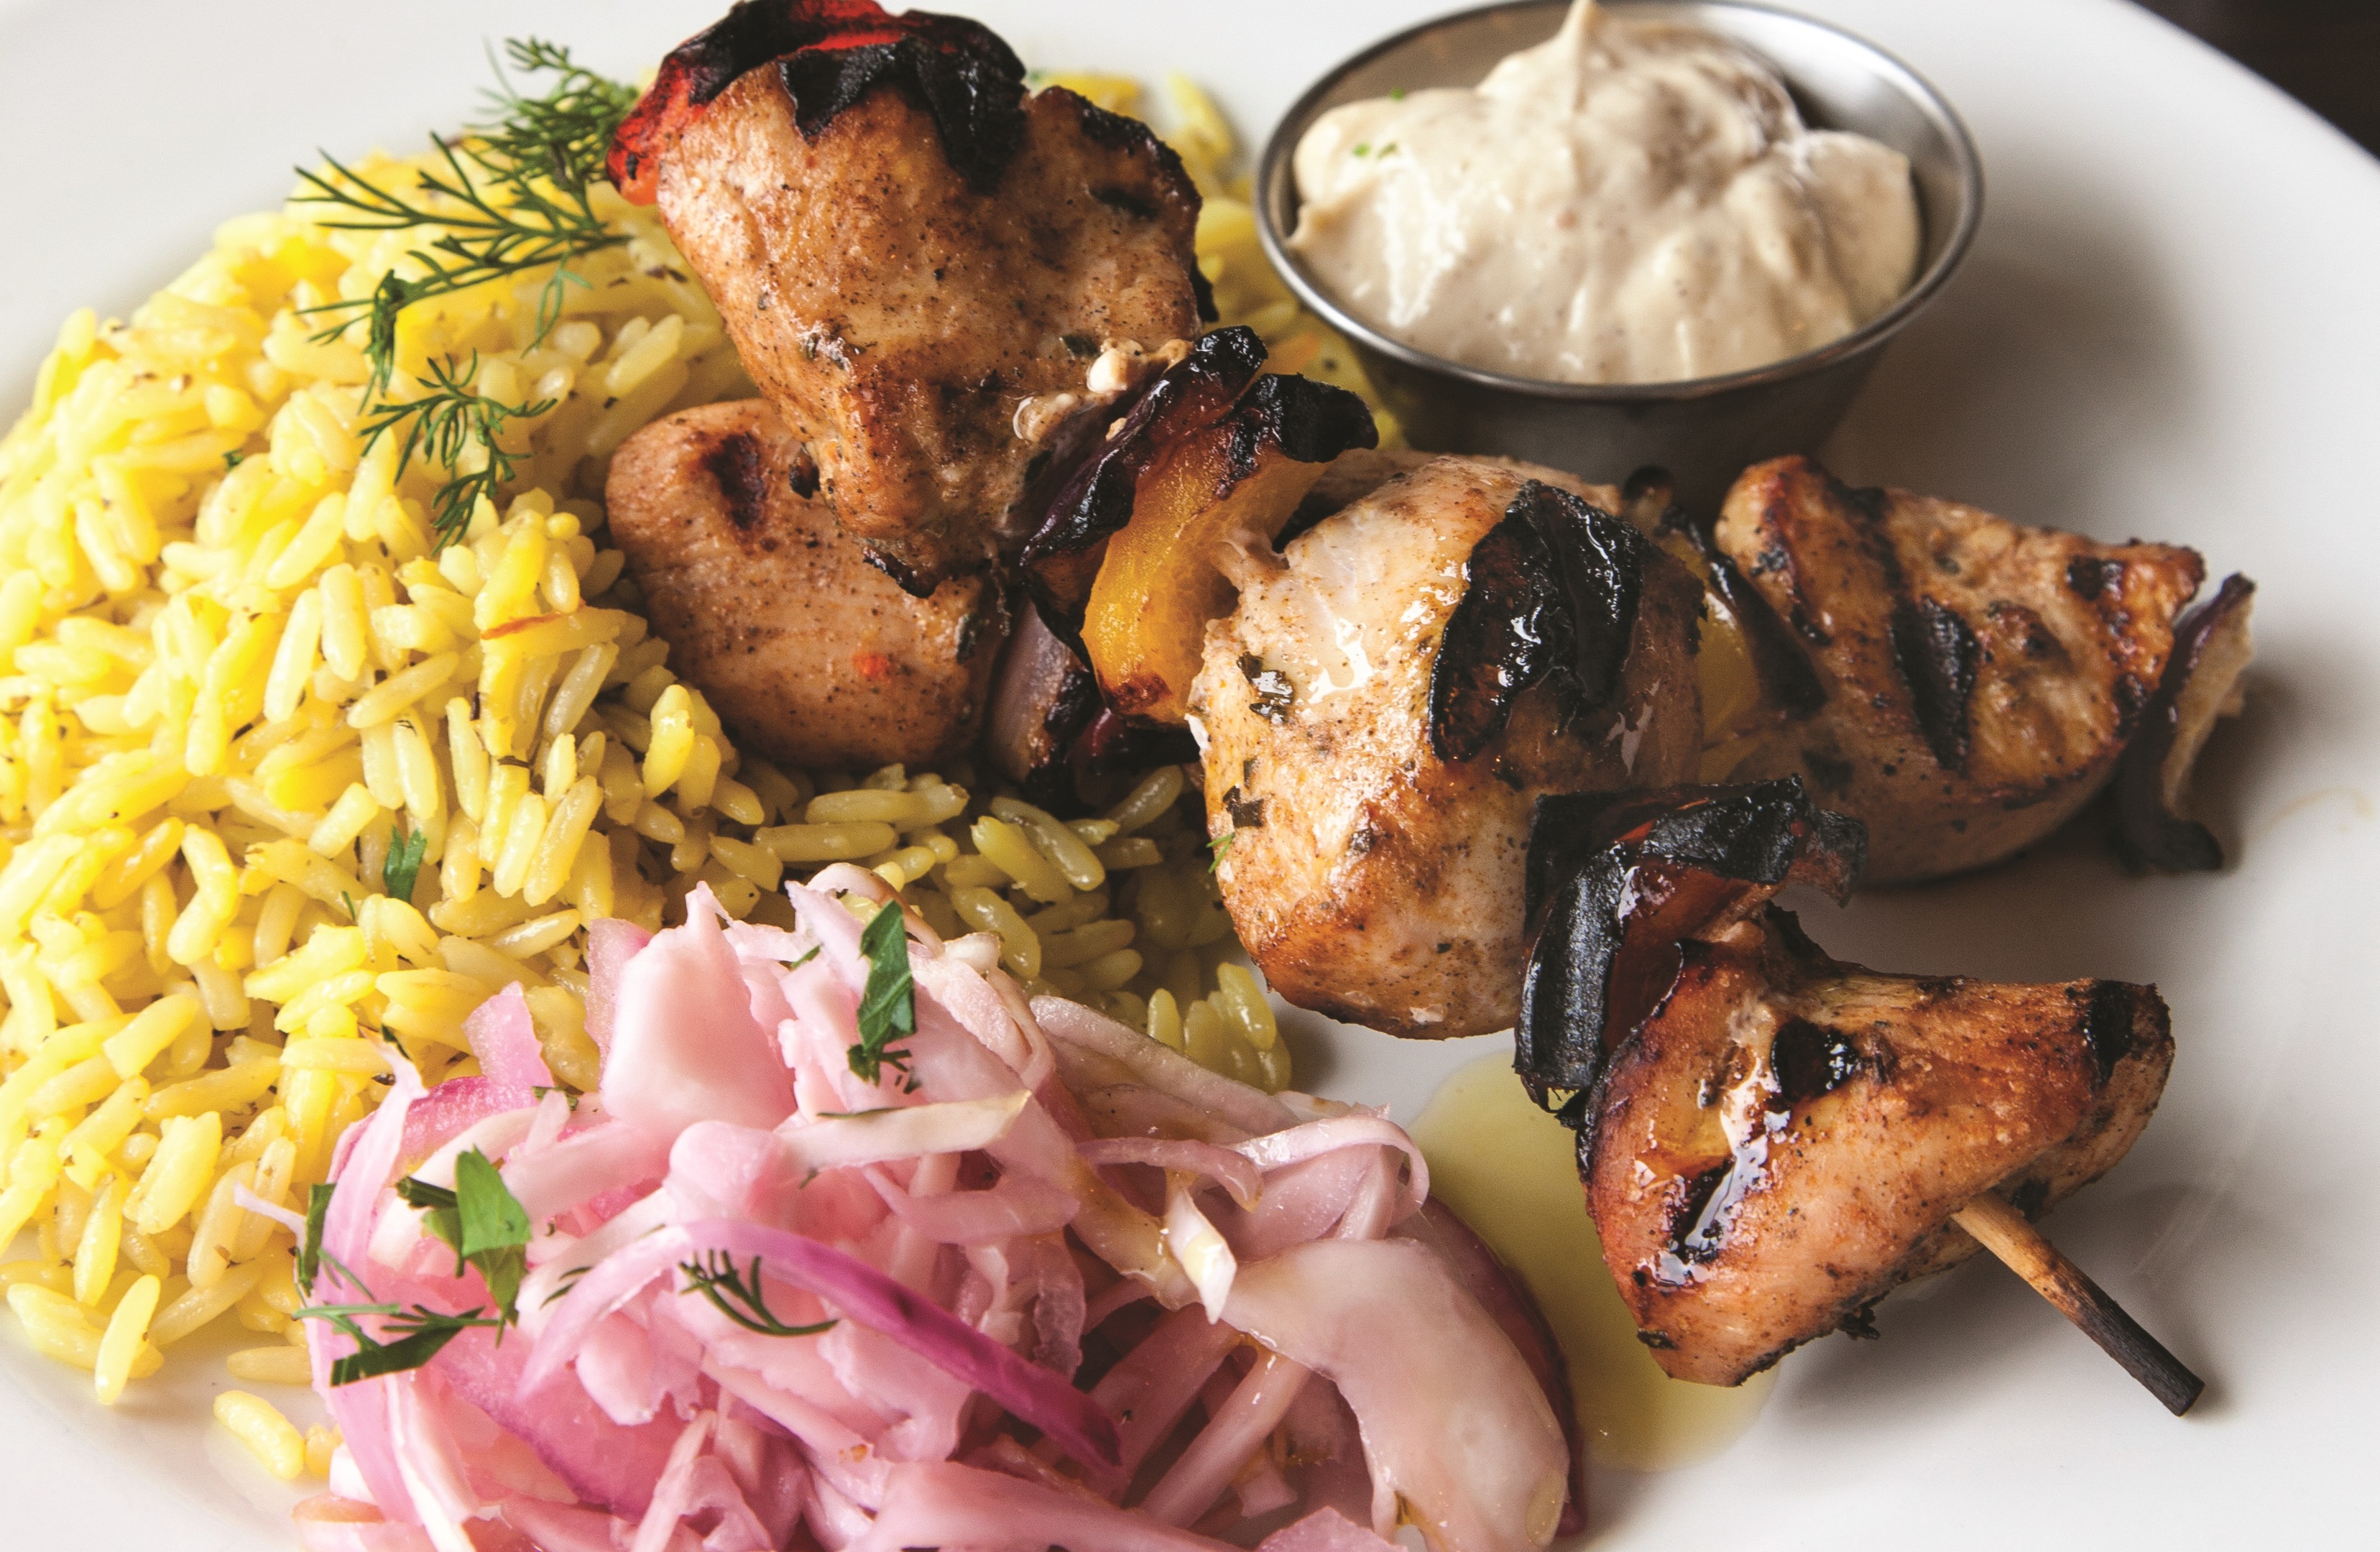 Chicken Skewers from The Real Greek by Tonia Buxton